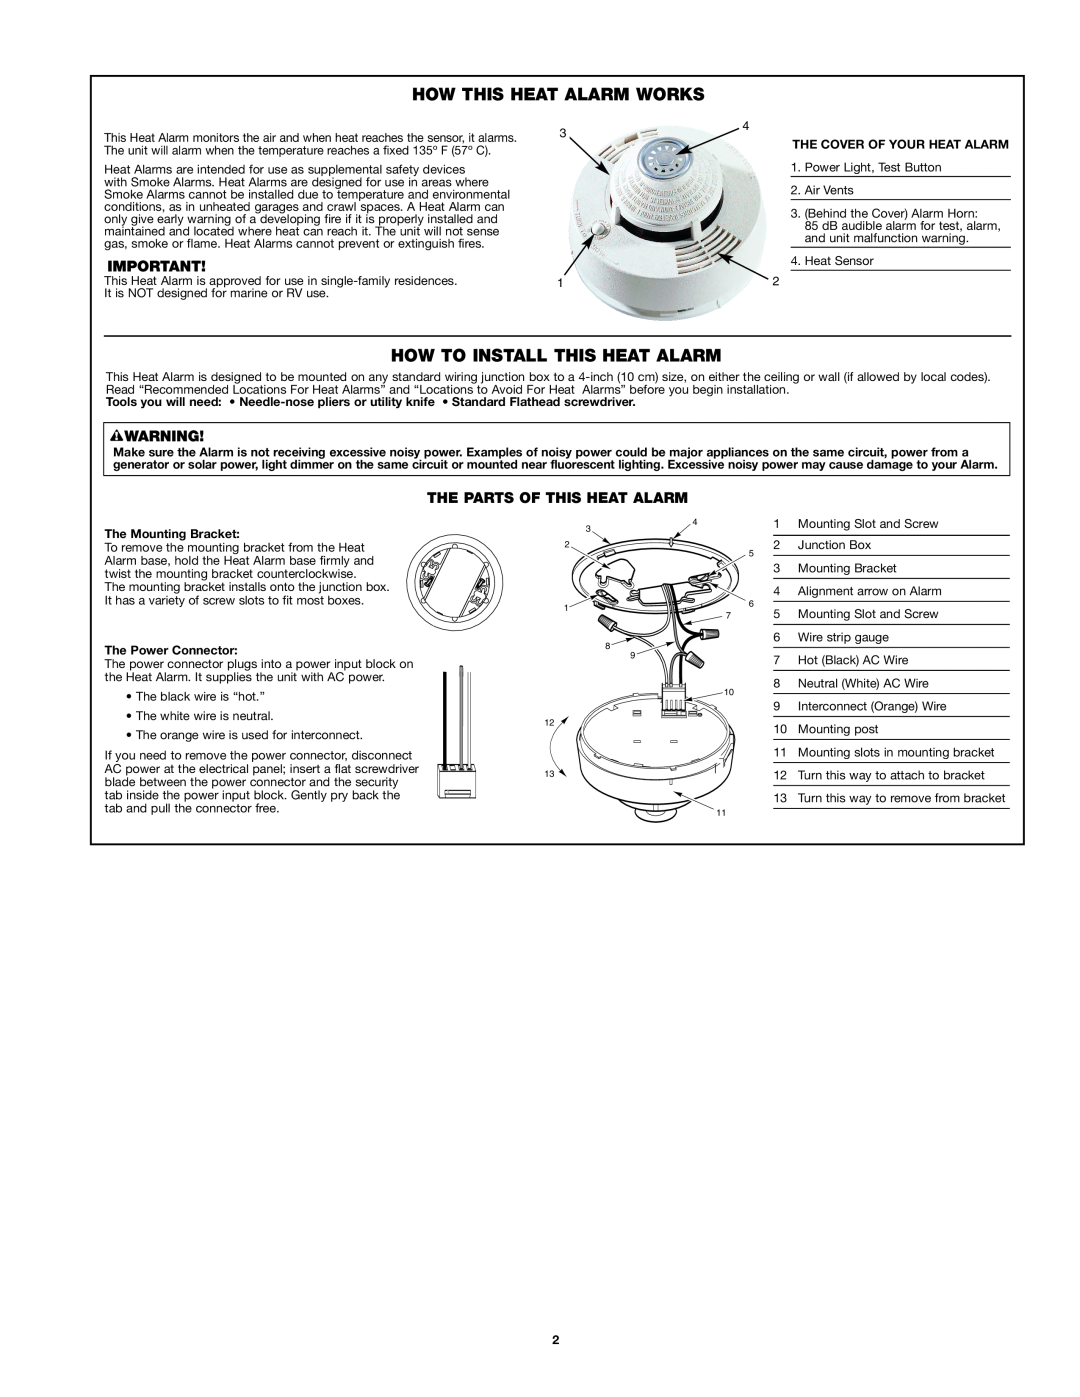 BRK electronic UL539 user manual How This Heat Alarm Works, How To Install This Heat Alarm, The Parts Of This Heat Alarm 